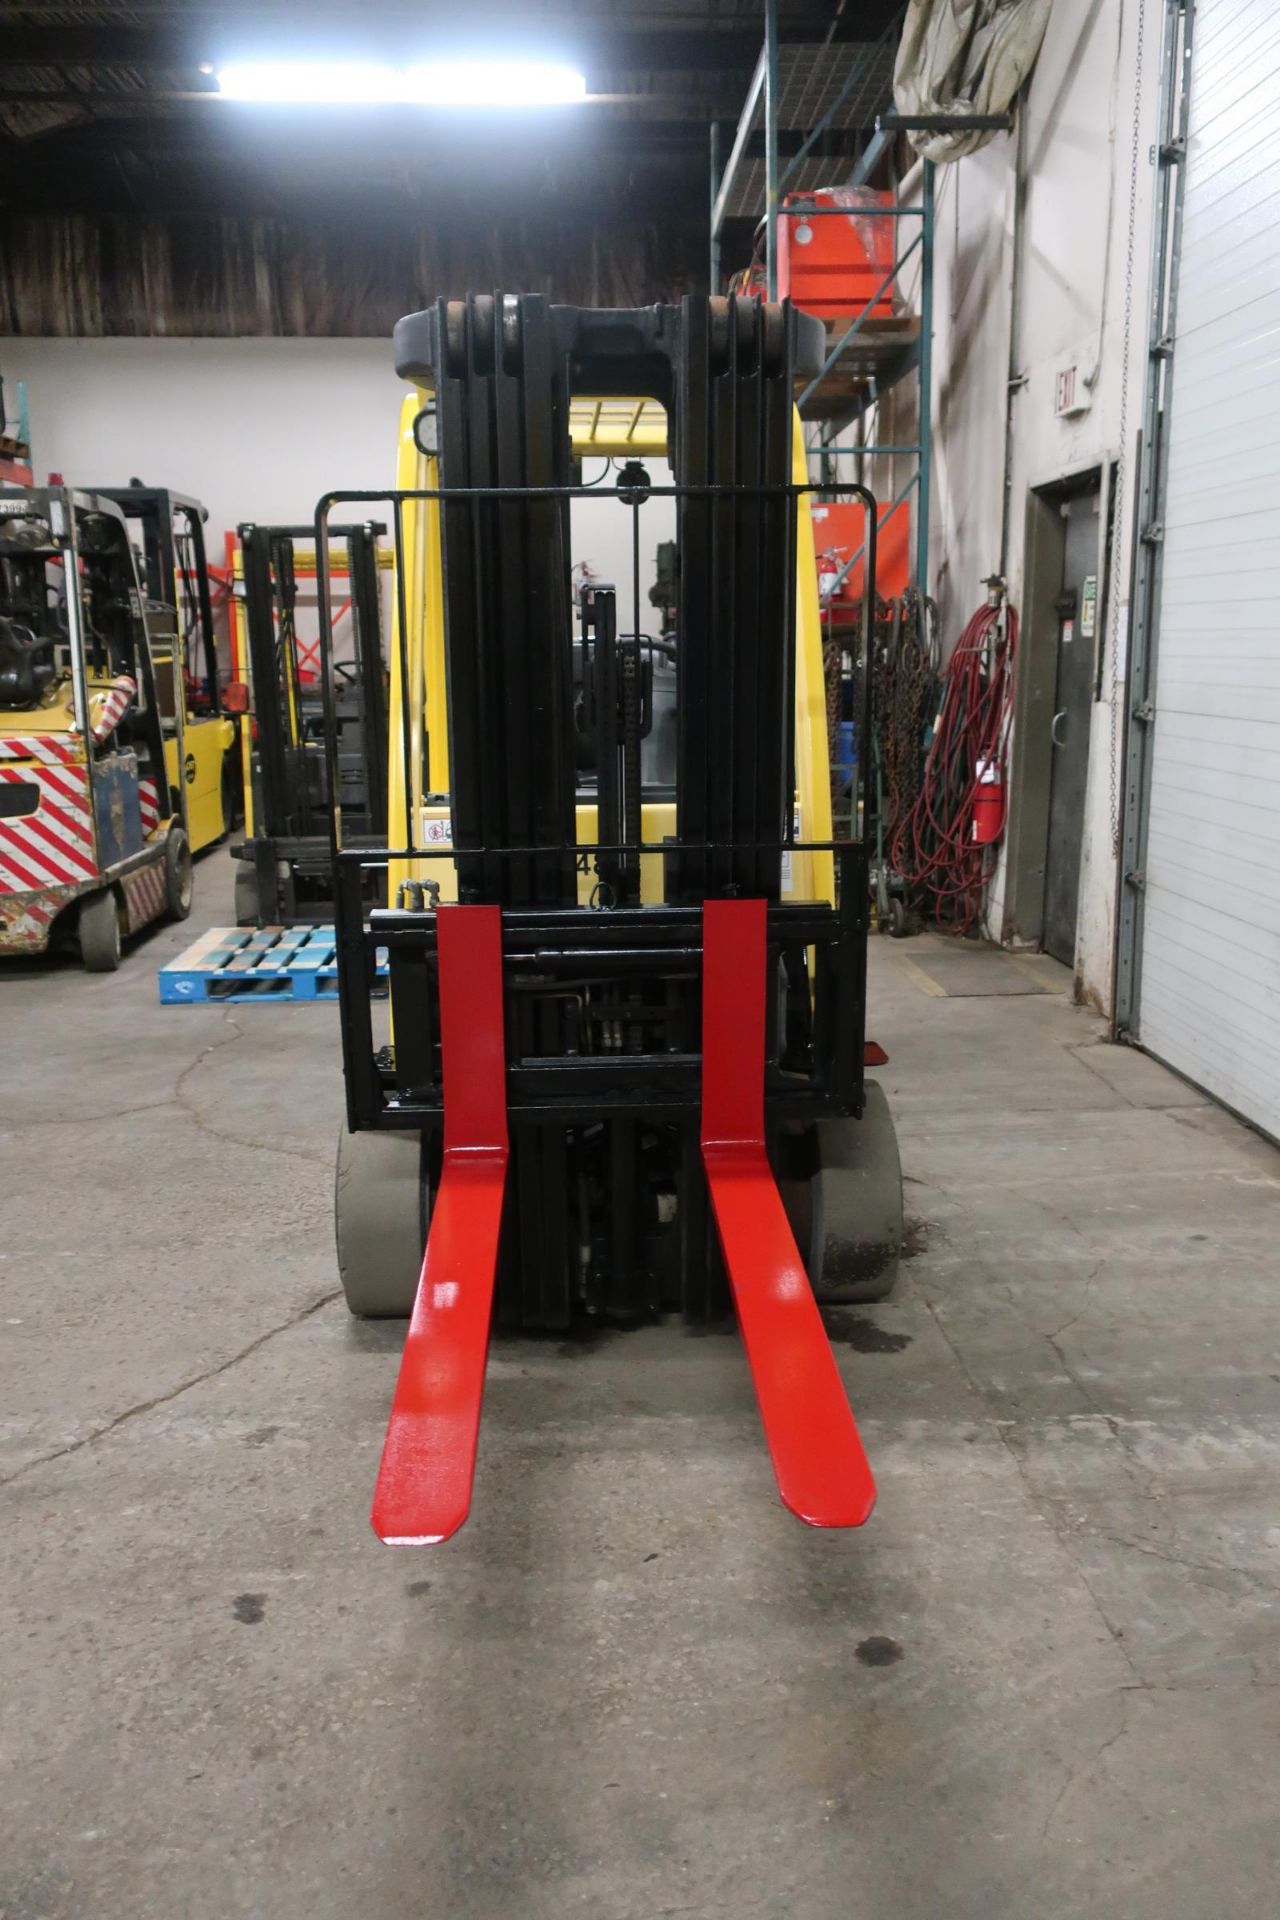 FREE CUSTOMS - 2012 Hyster 6000lbs Capacity Forklift with 4-stage mast - LPG (propane) with - Image 2 of 2